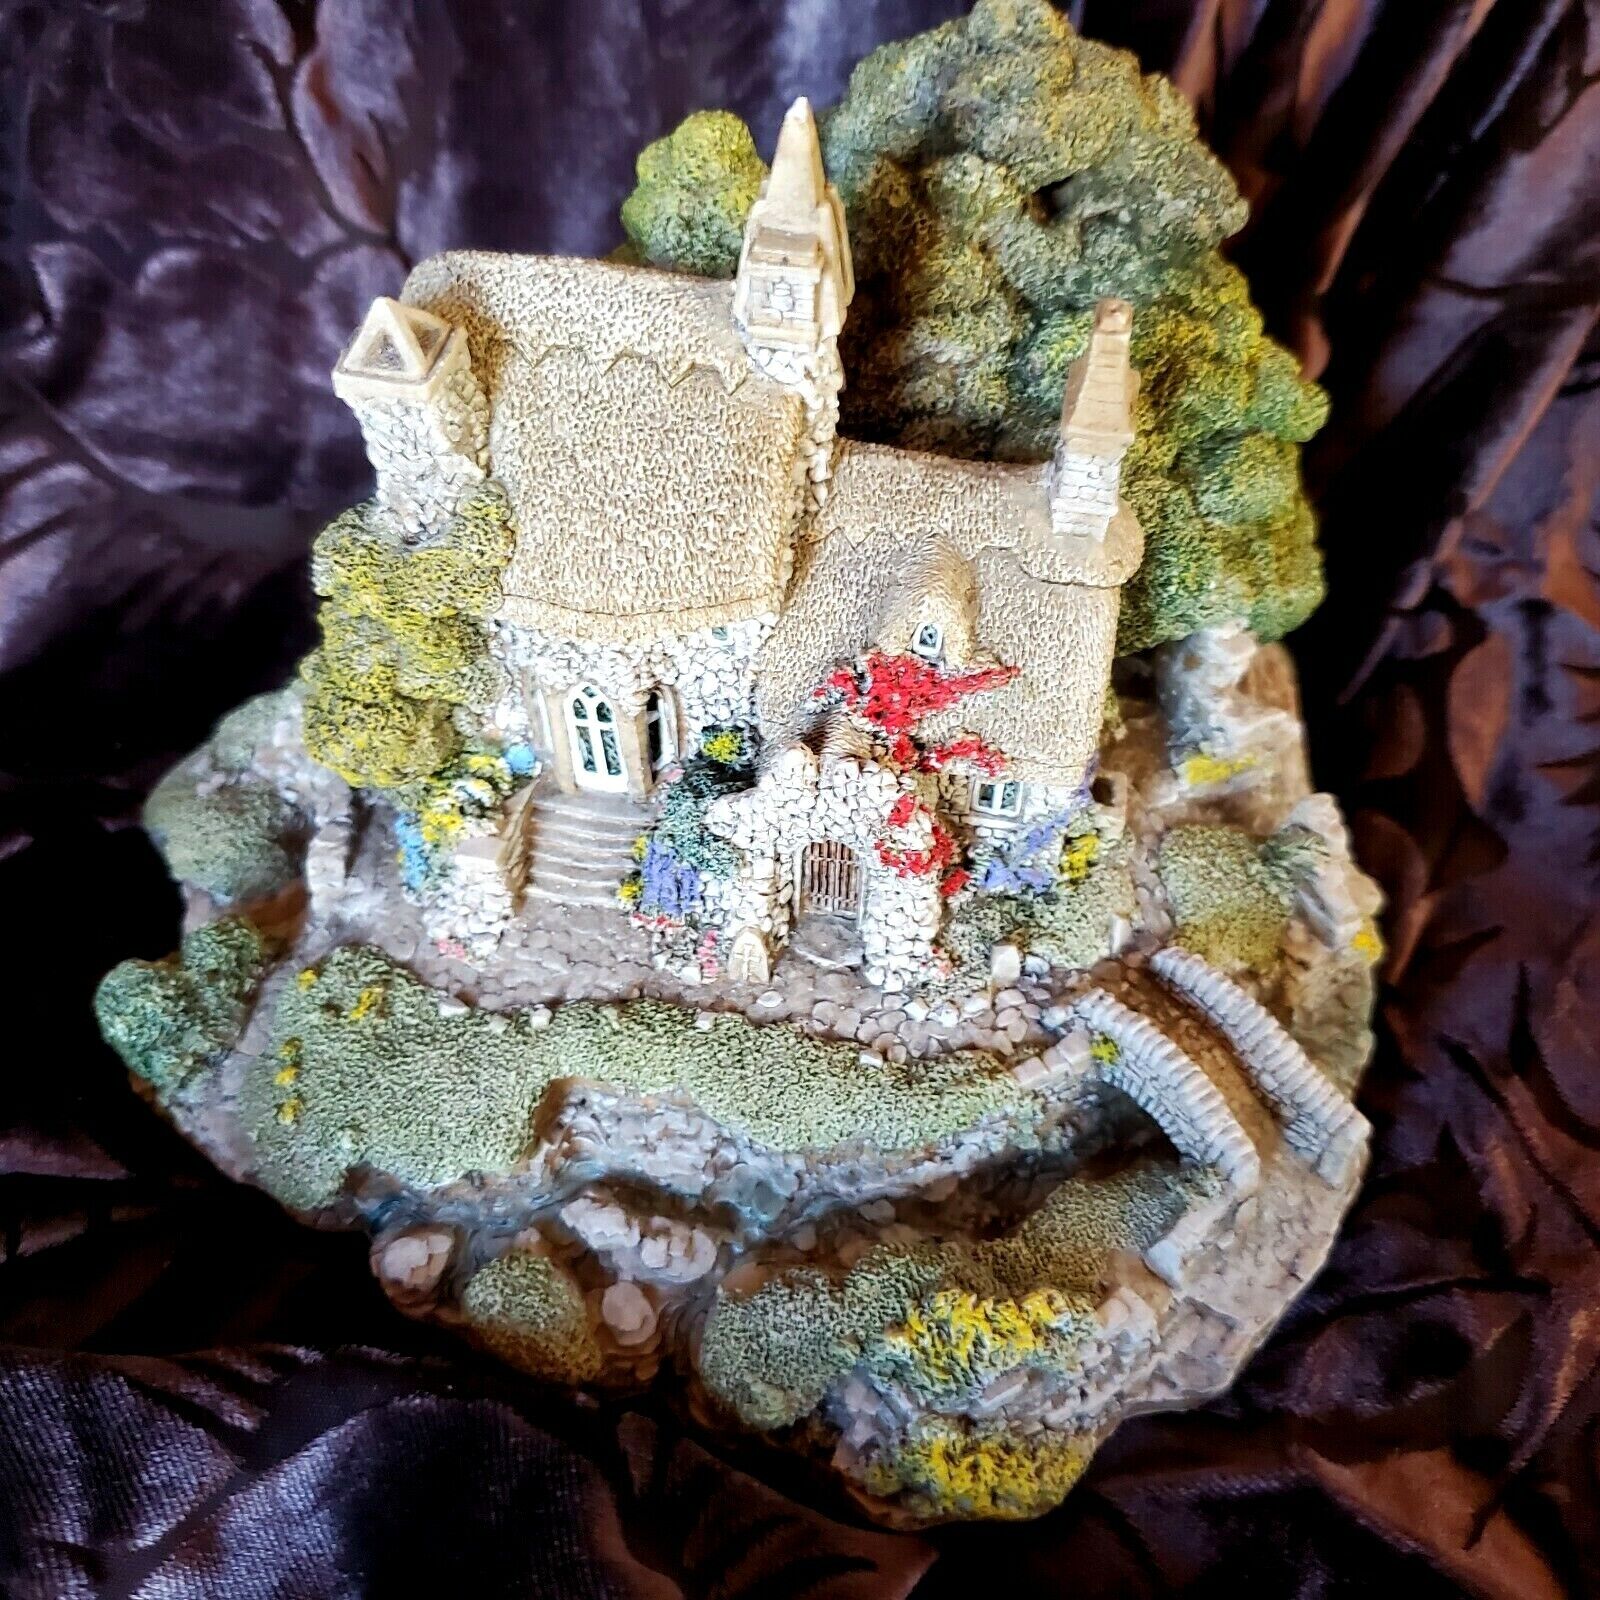 SALE新品】 Lilliput Lane/CONVENT IN THE WOODSの通販 by ねこ's shop